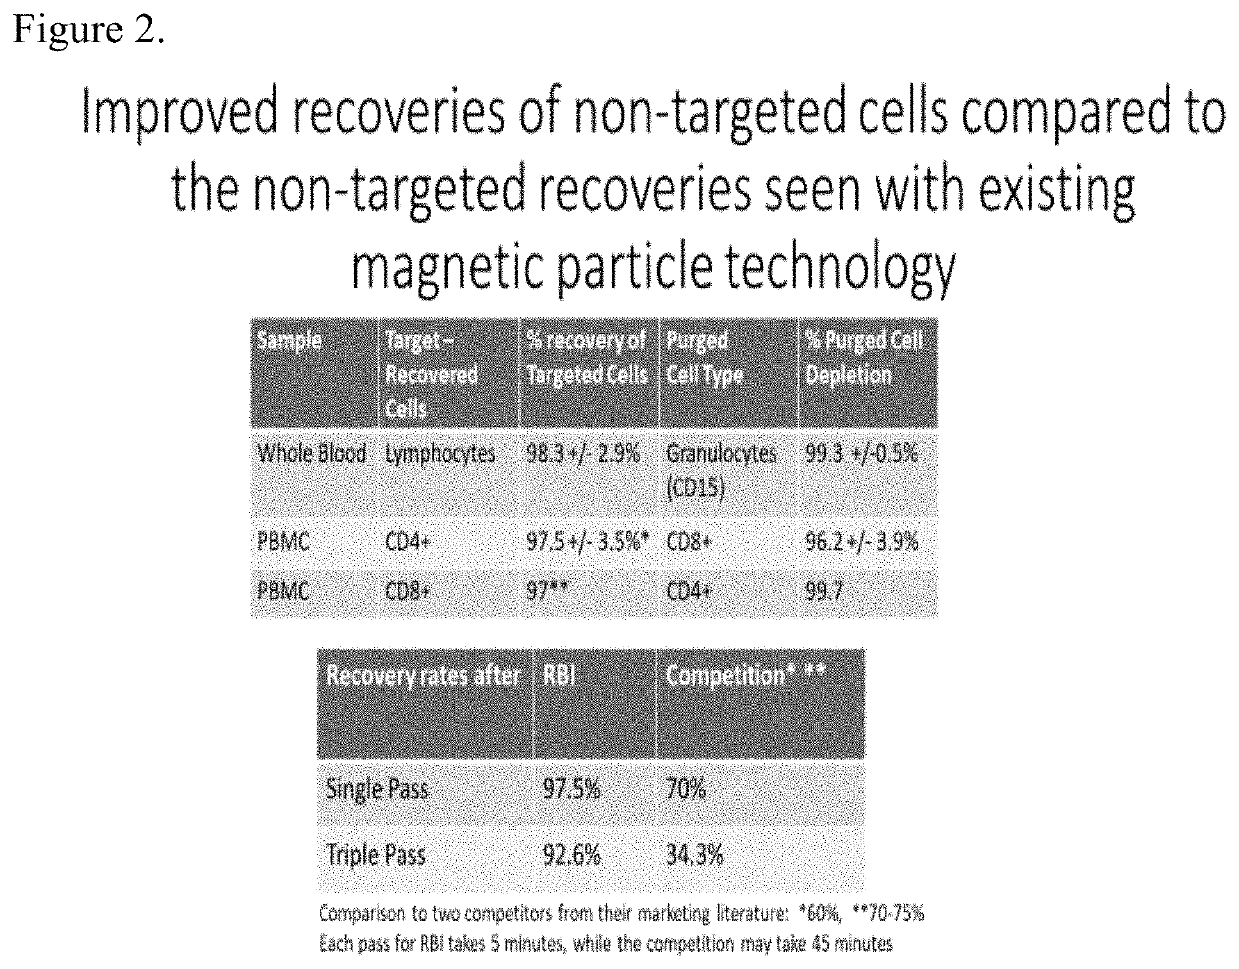 Improved Manufacturing Procedures for Cell Based Therapies